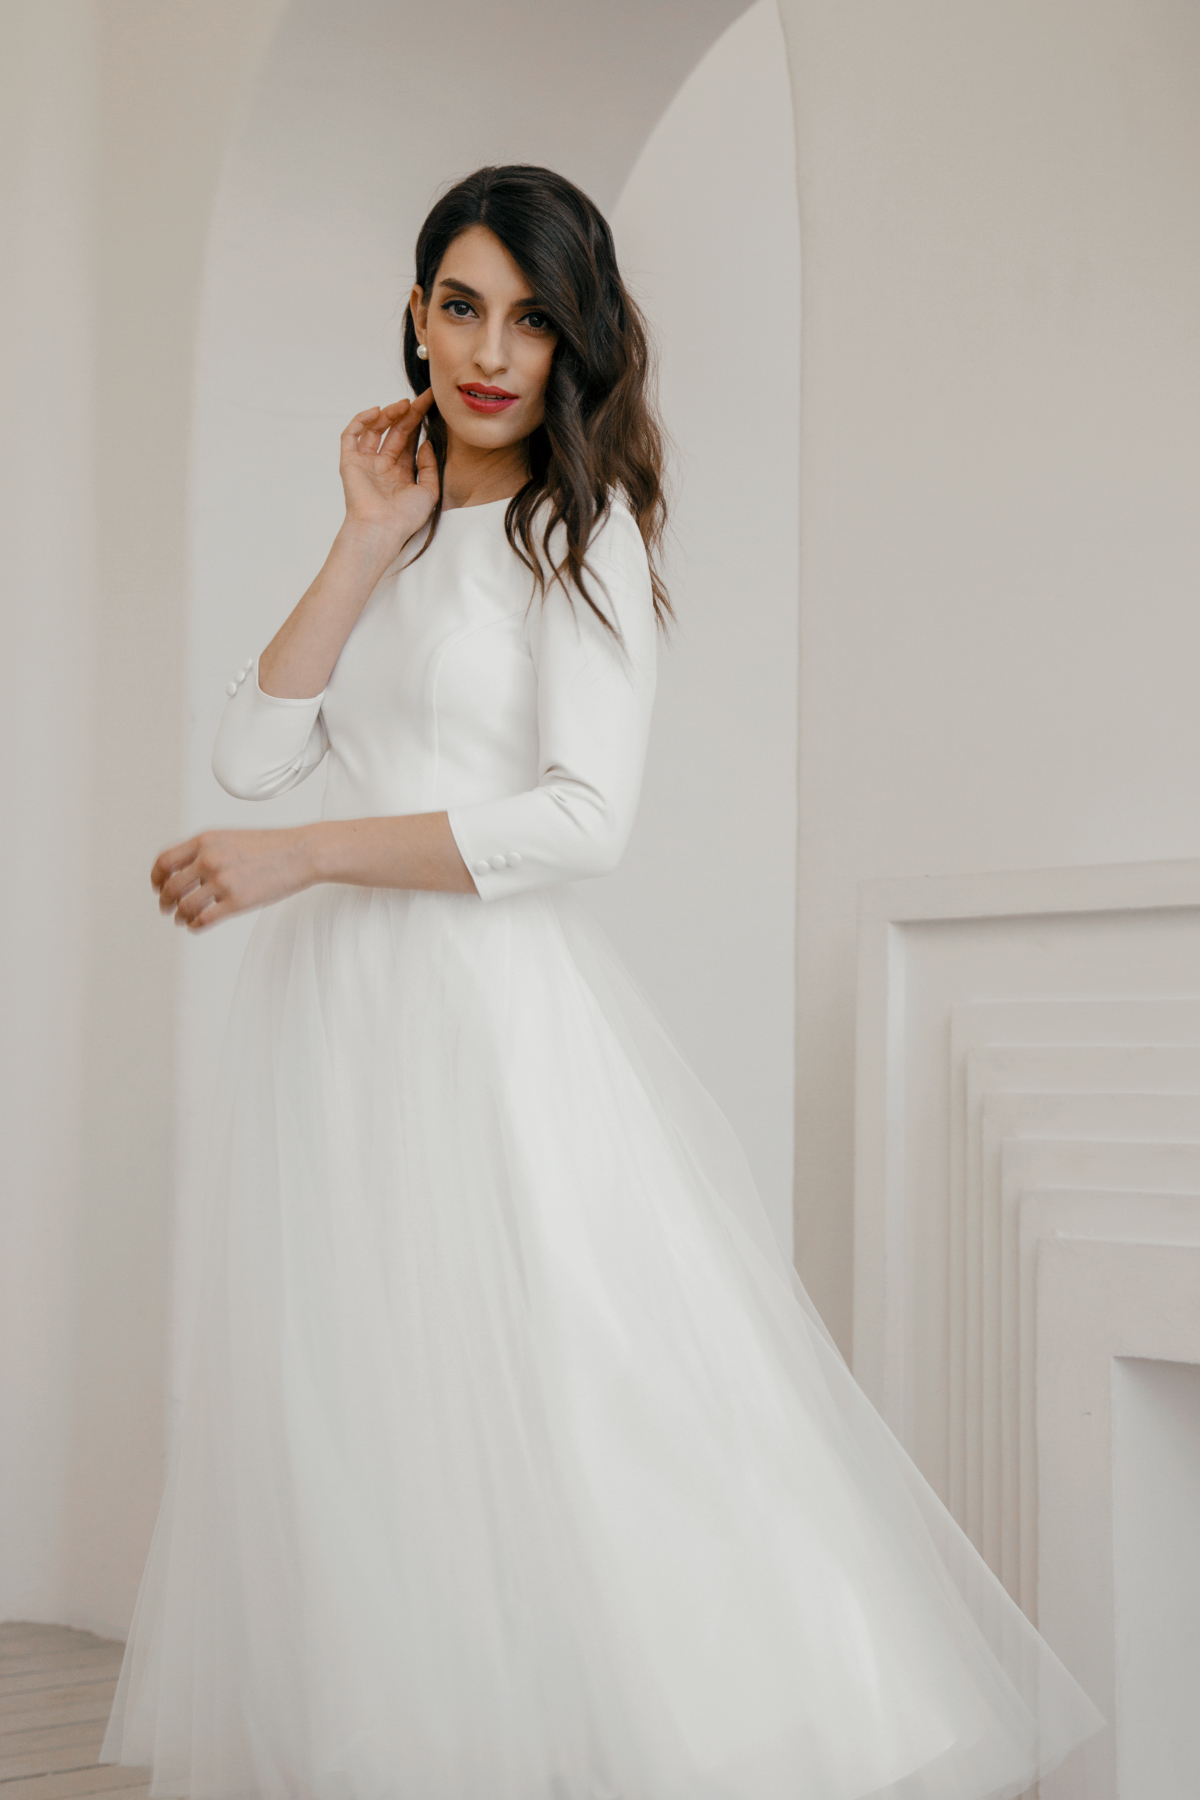 Short wedding dress with sleeves